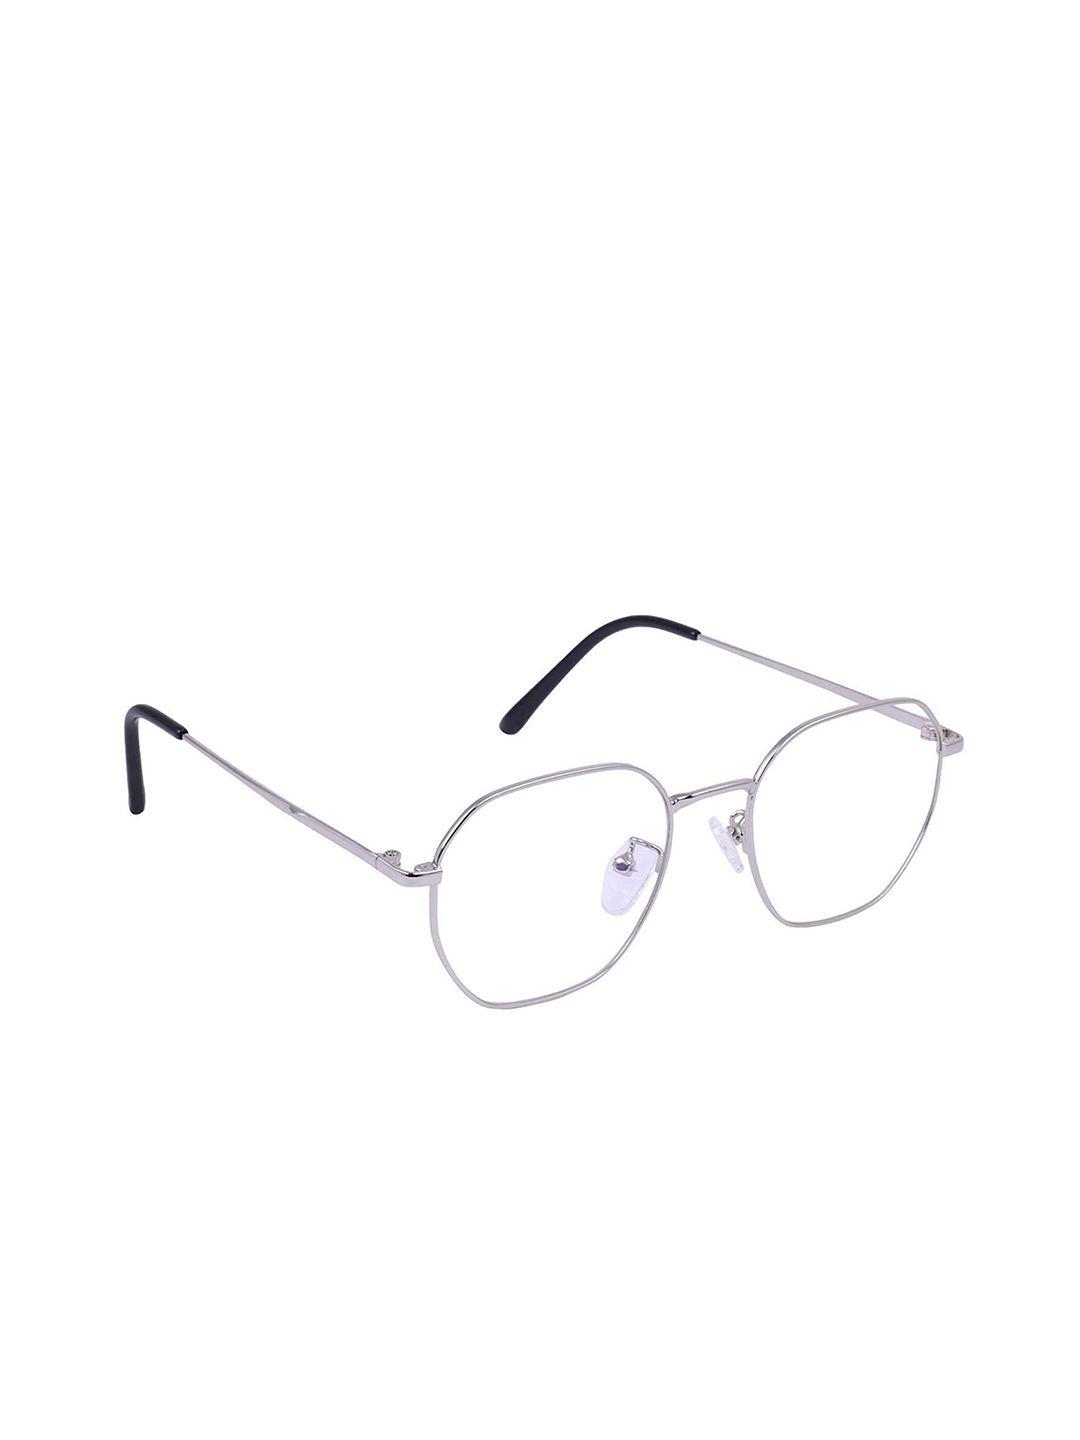 optify unisex clear lens & silver-toned round sunglasses with uv protected lens mf round silver